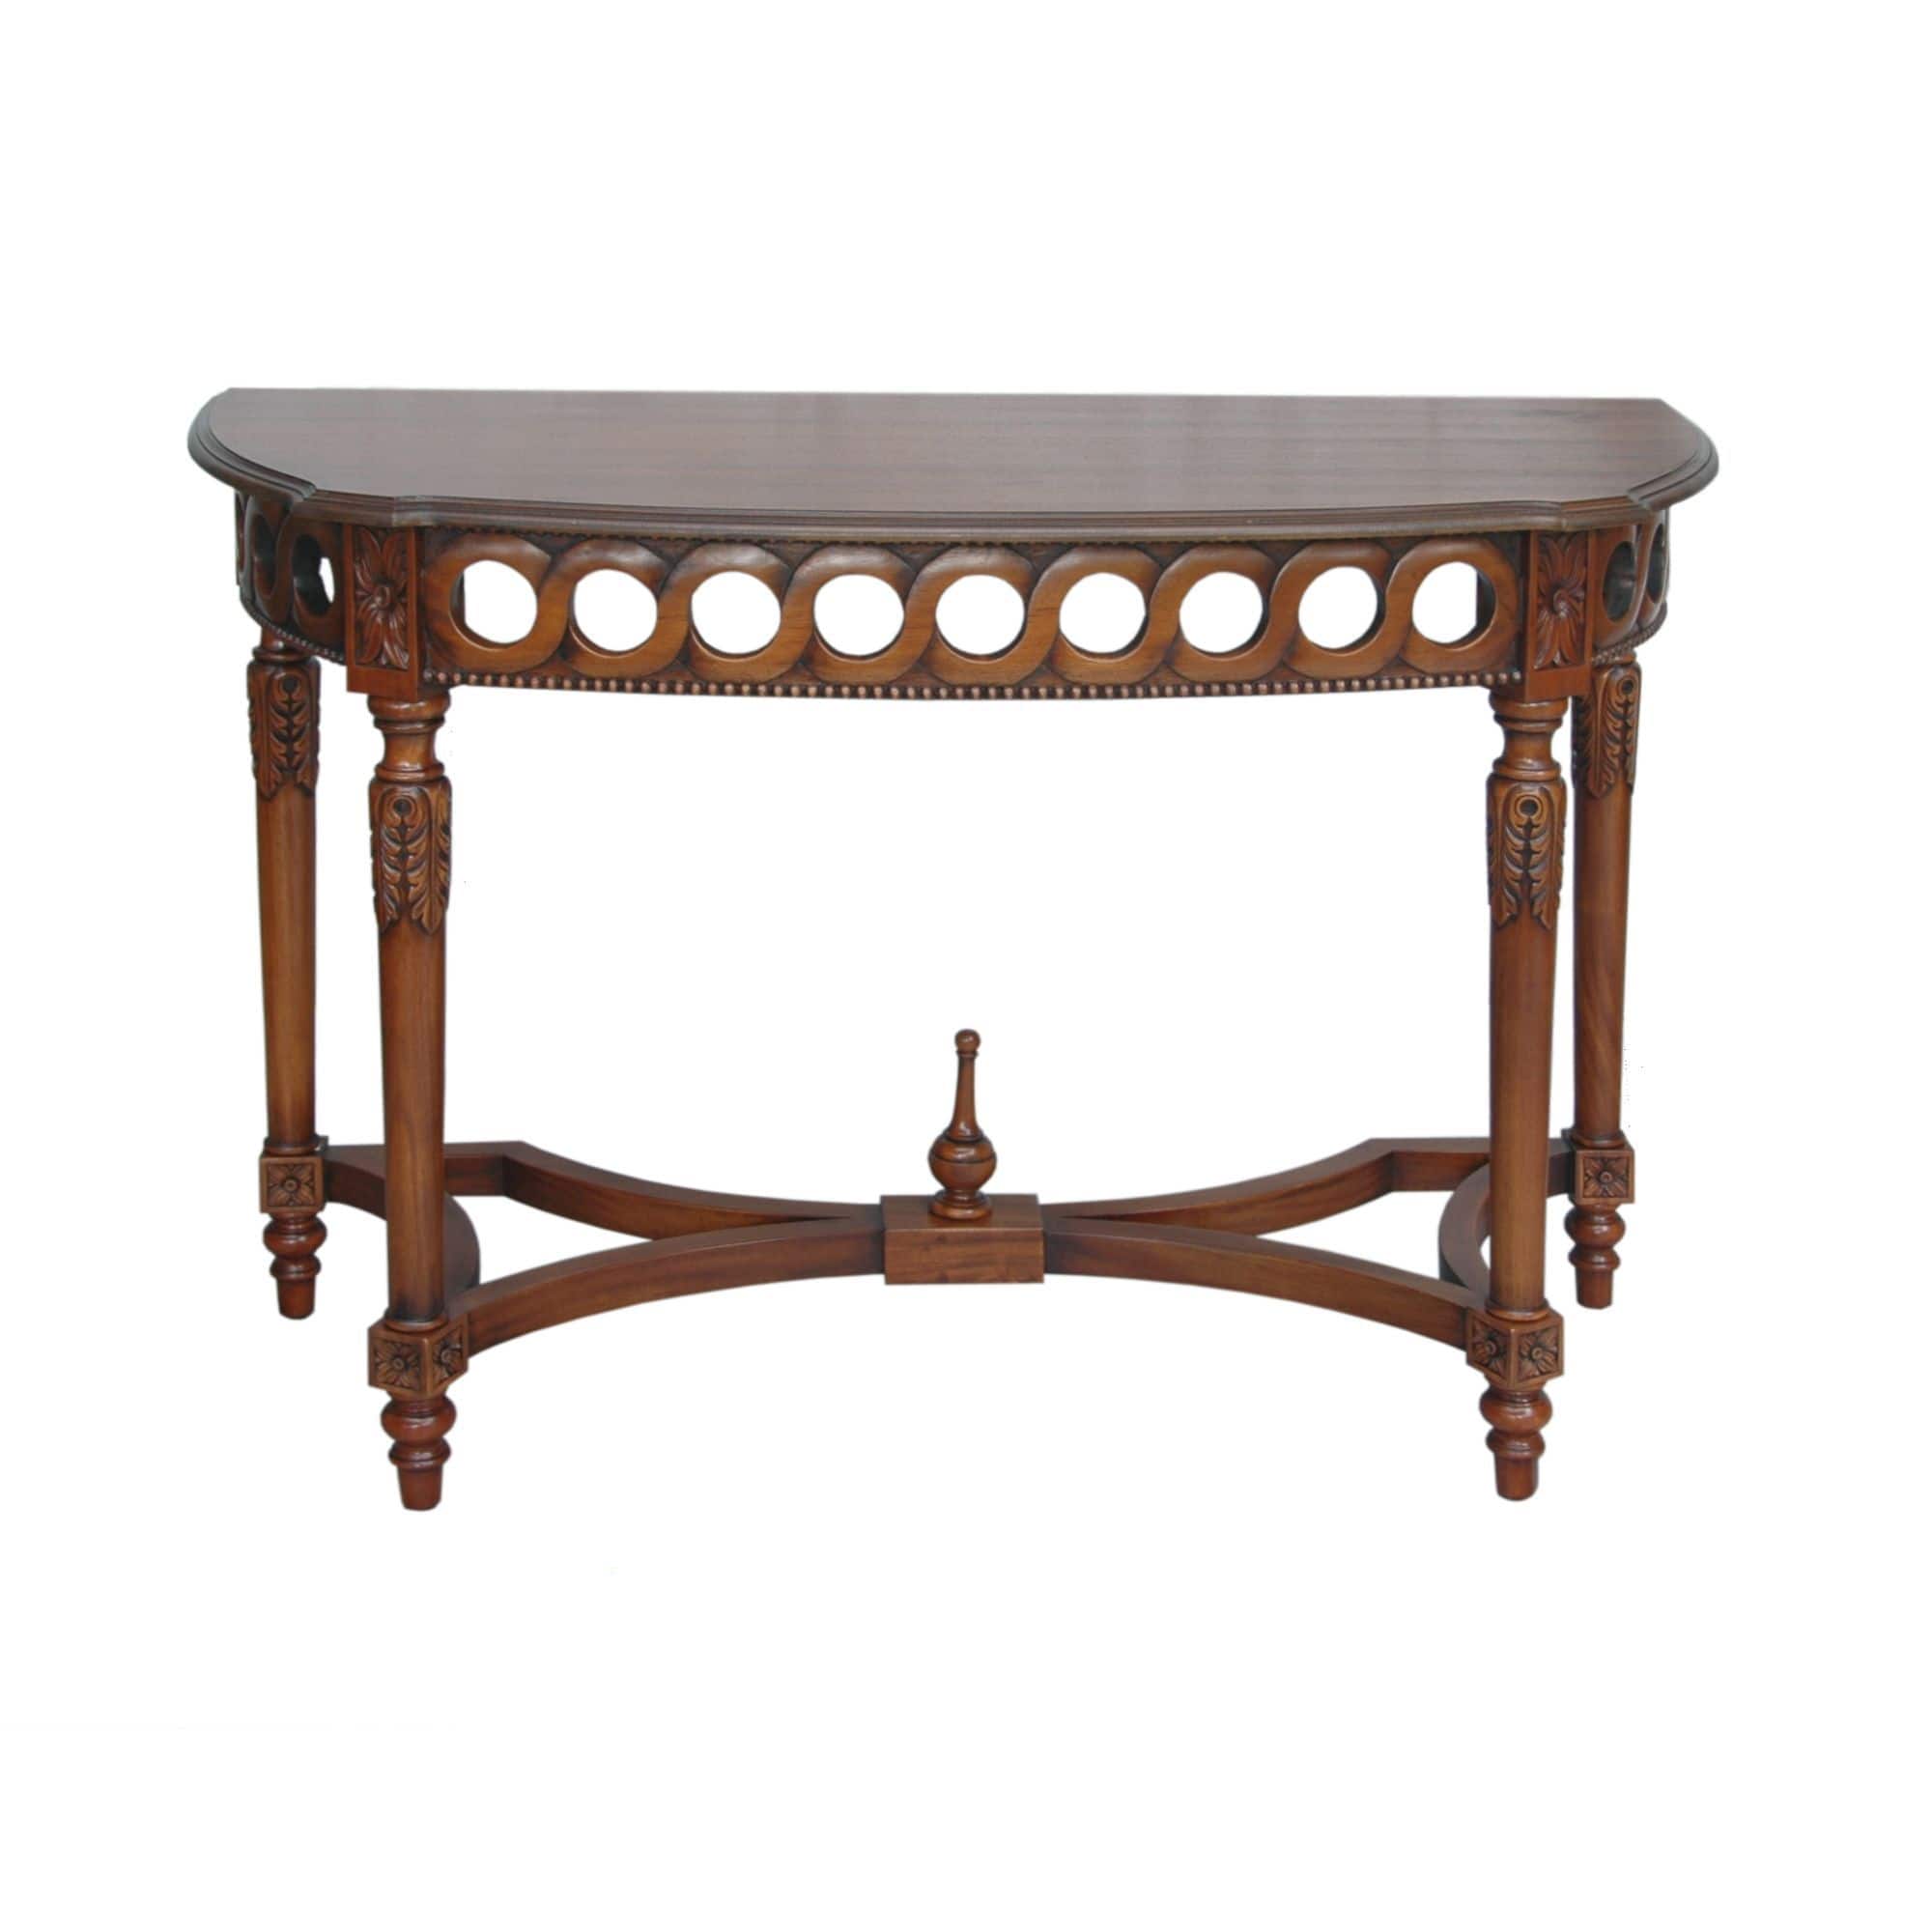 Anderson Teak Outdoor Table Anderson Teak Neoclassical Demilune Console